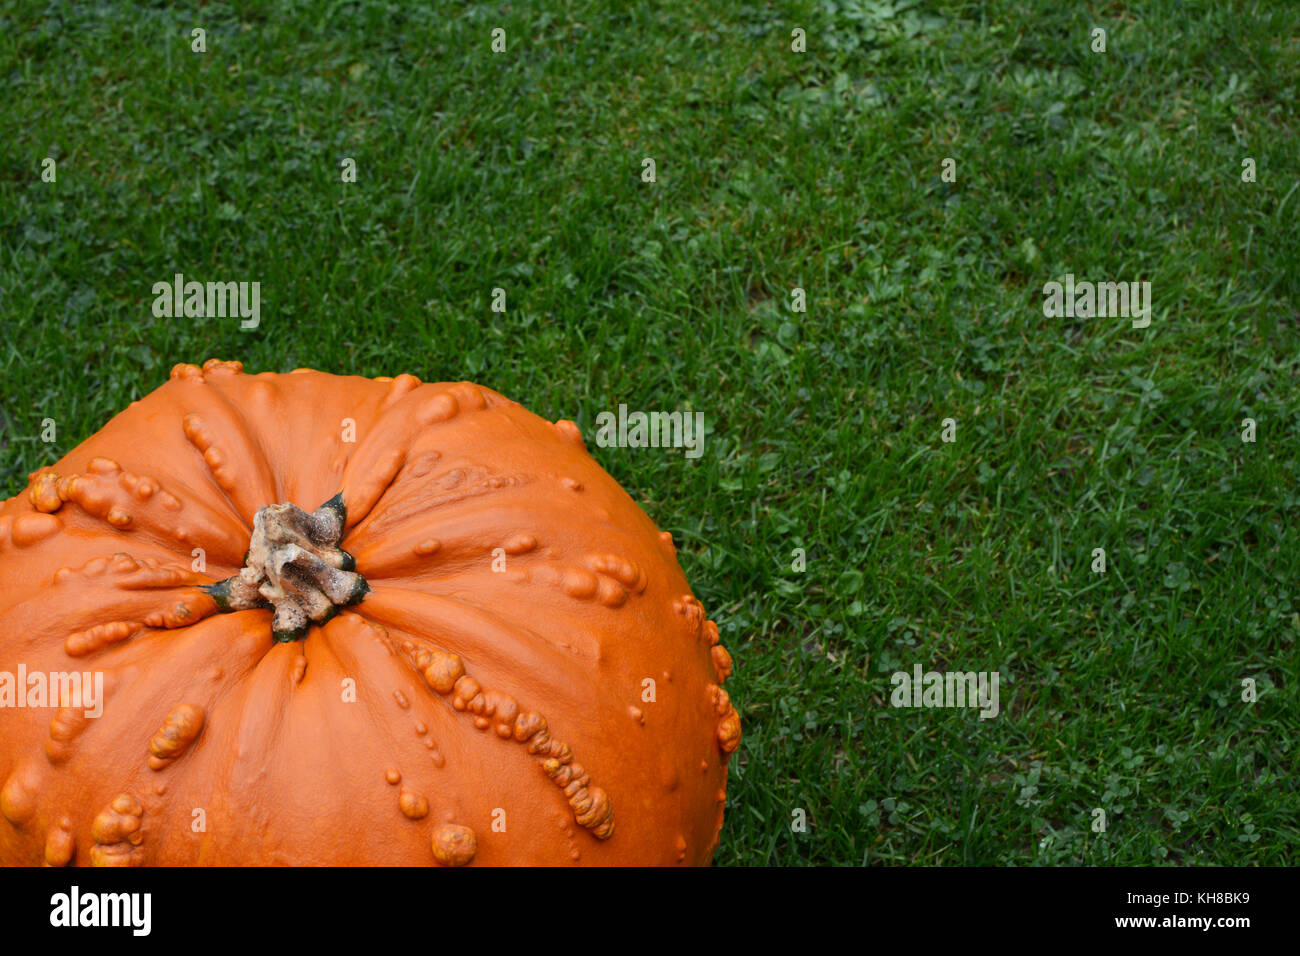 Bright orange warty pumpkin on lush green grass, with copy space Stock Photo